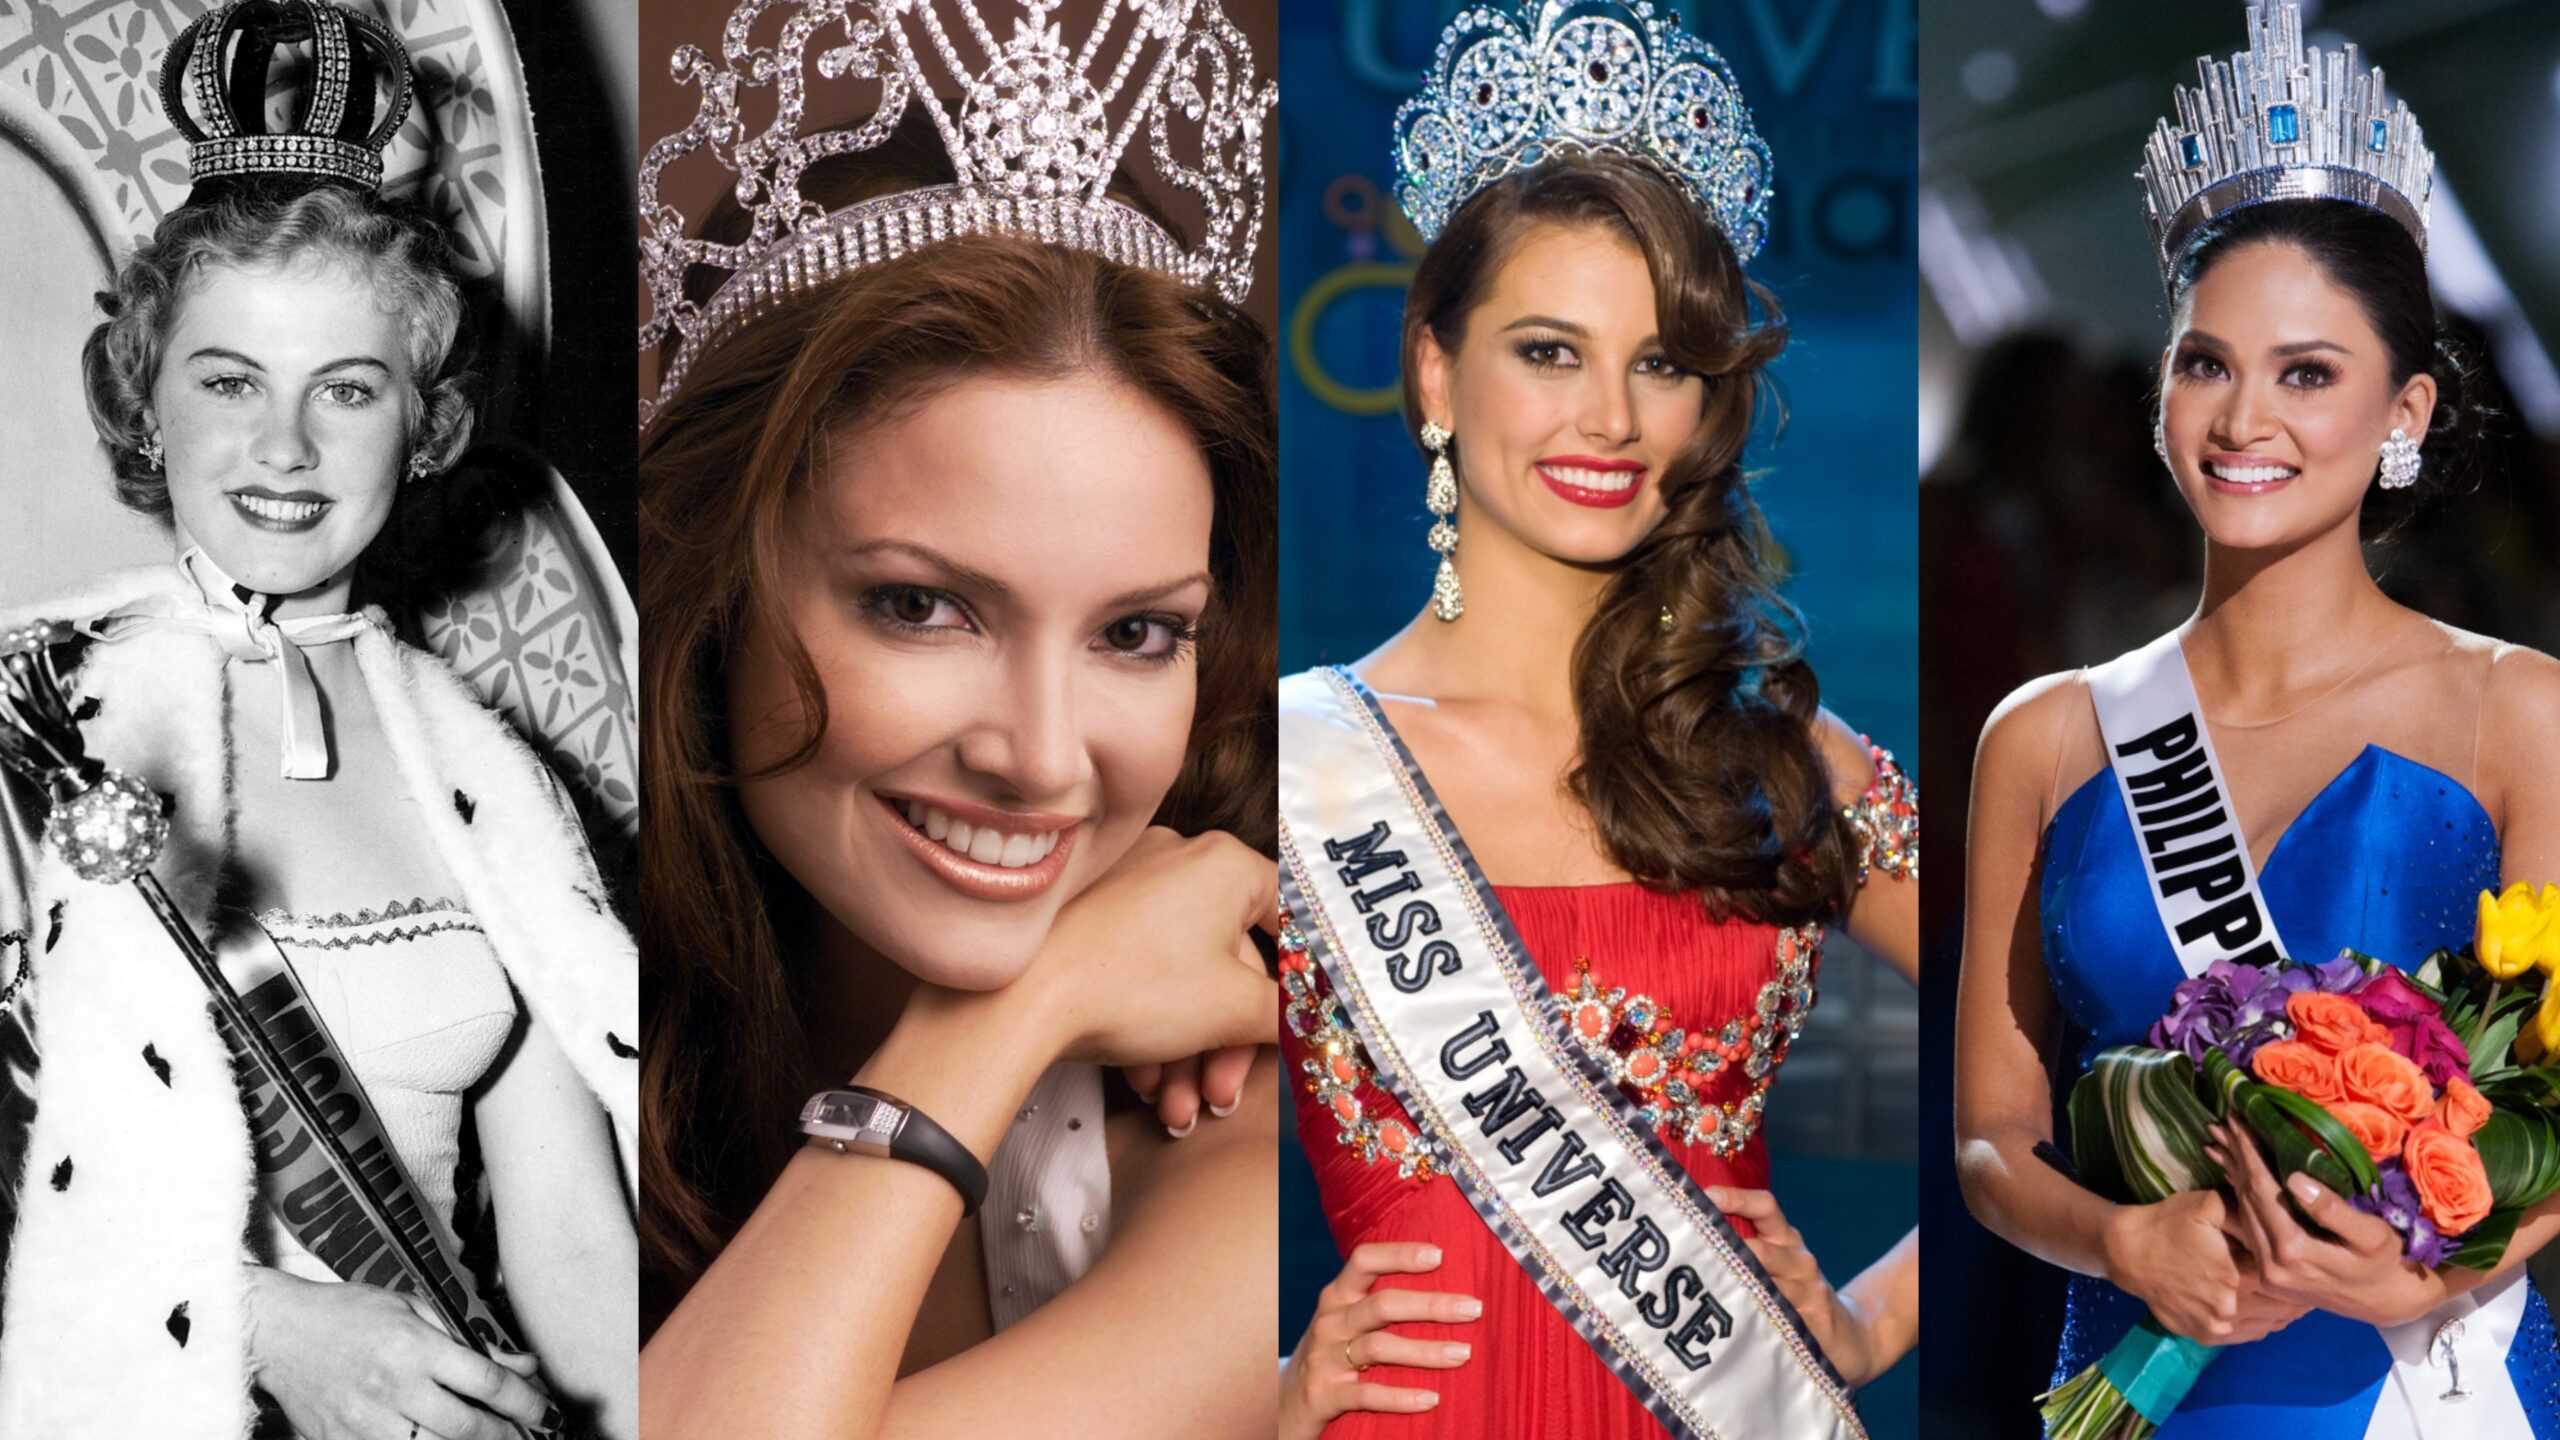 IN PHOTOS: Miss Universe crowns through the years